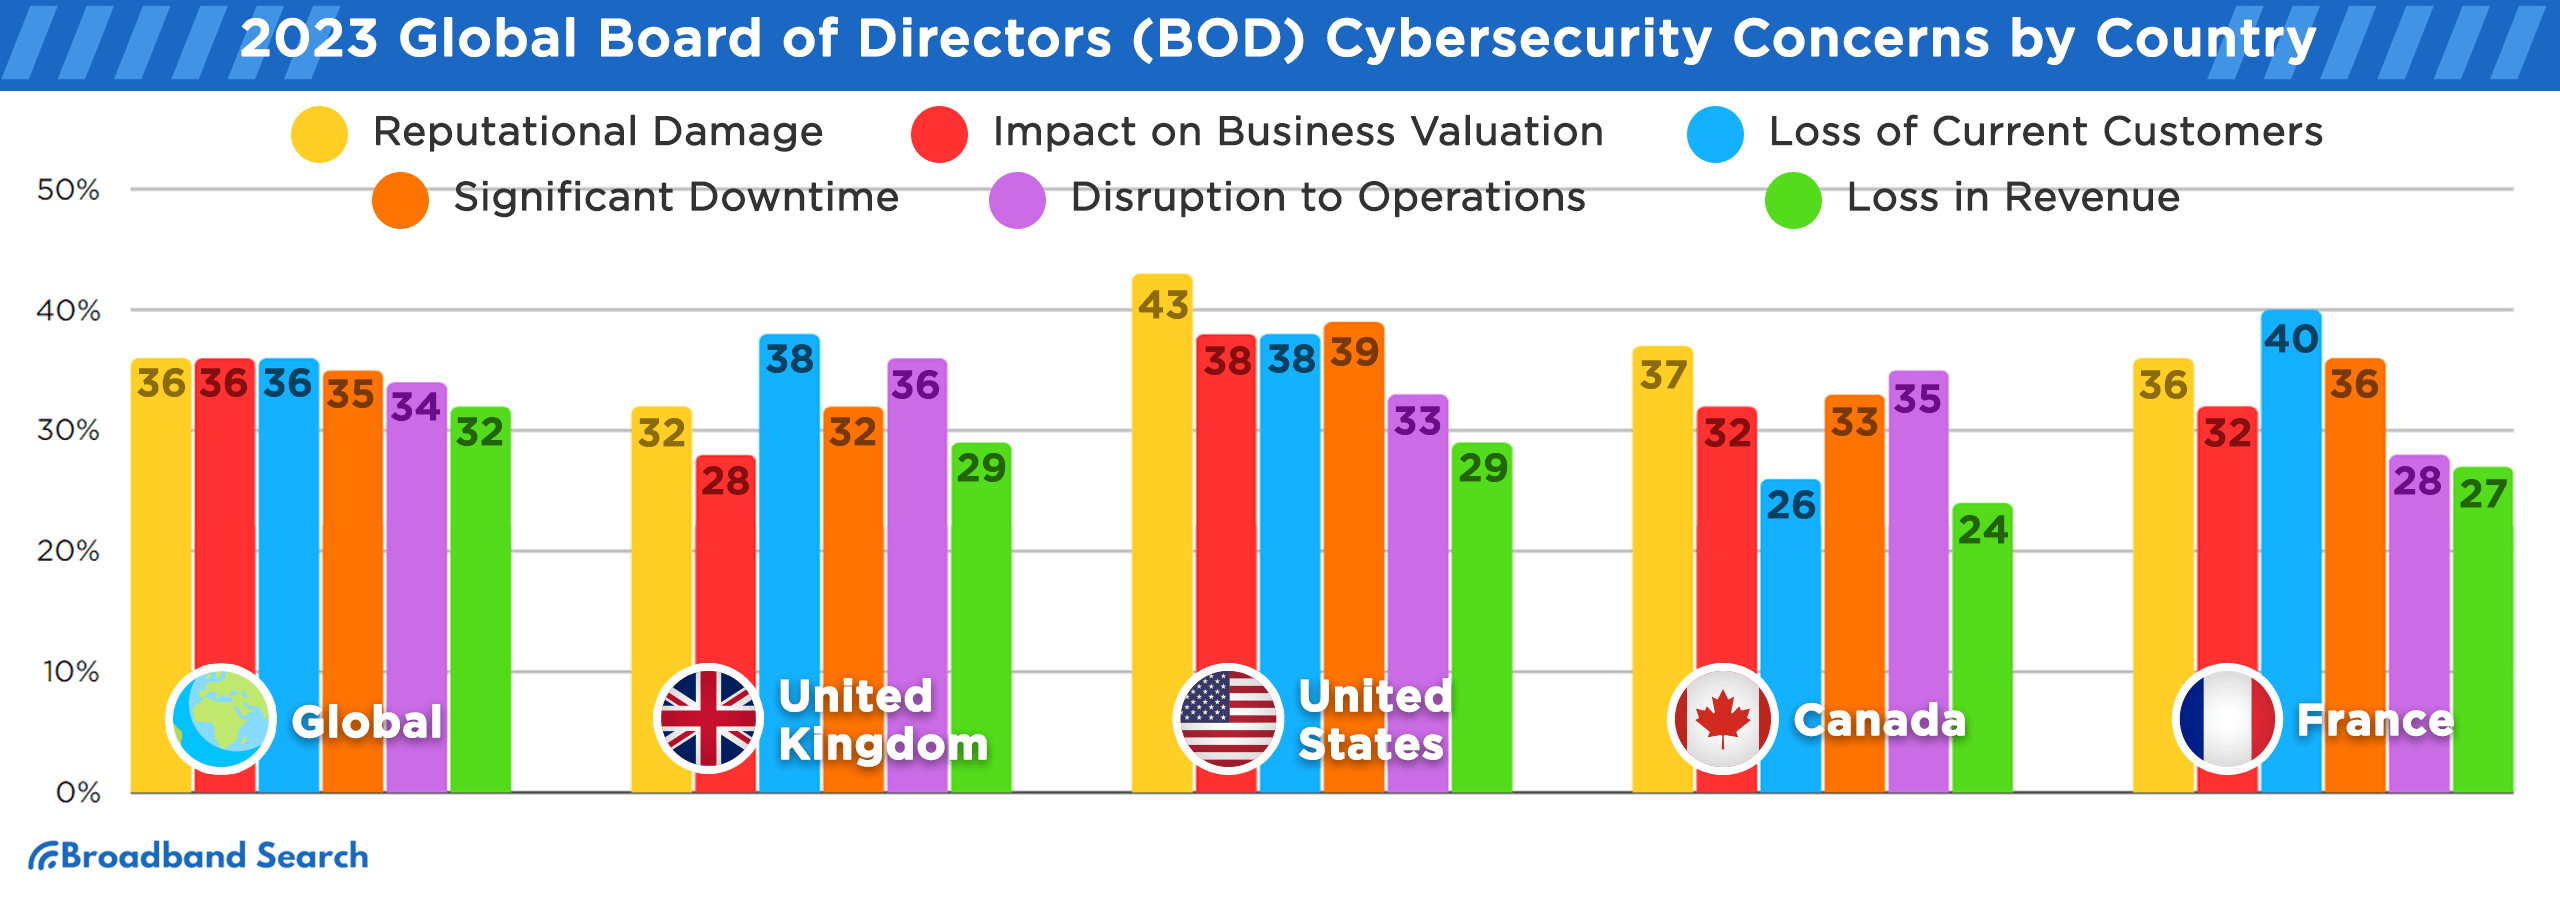 2023 global board of directors (BOD) cybersecurity concerns by country like the united kingdom, united states, canaba, and france